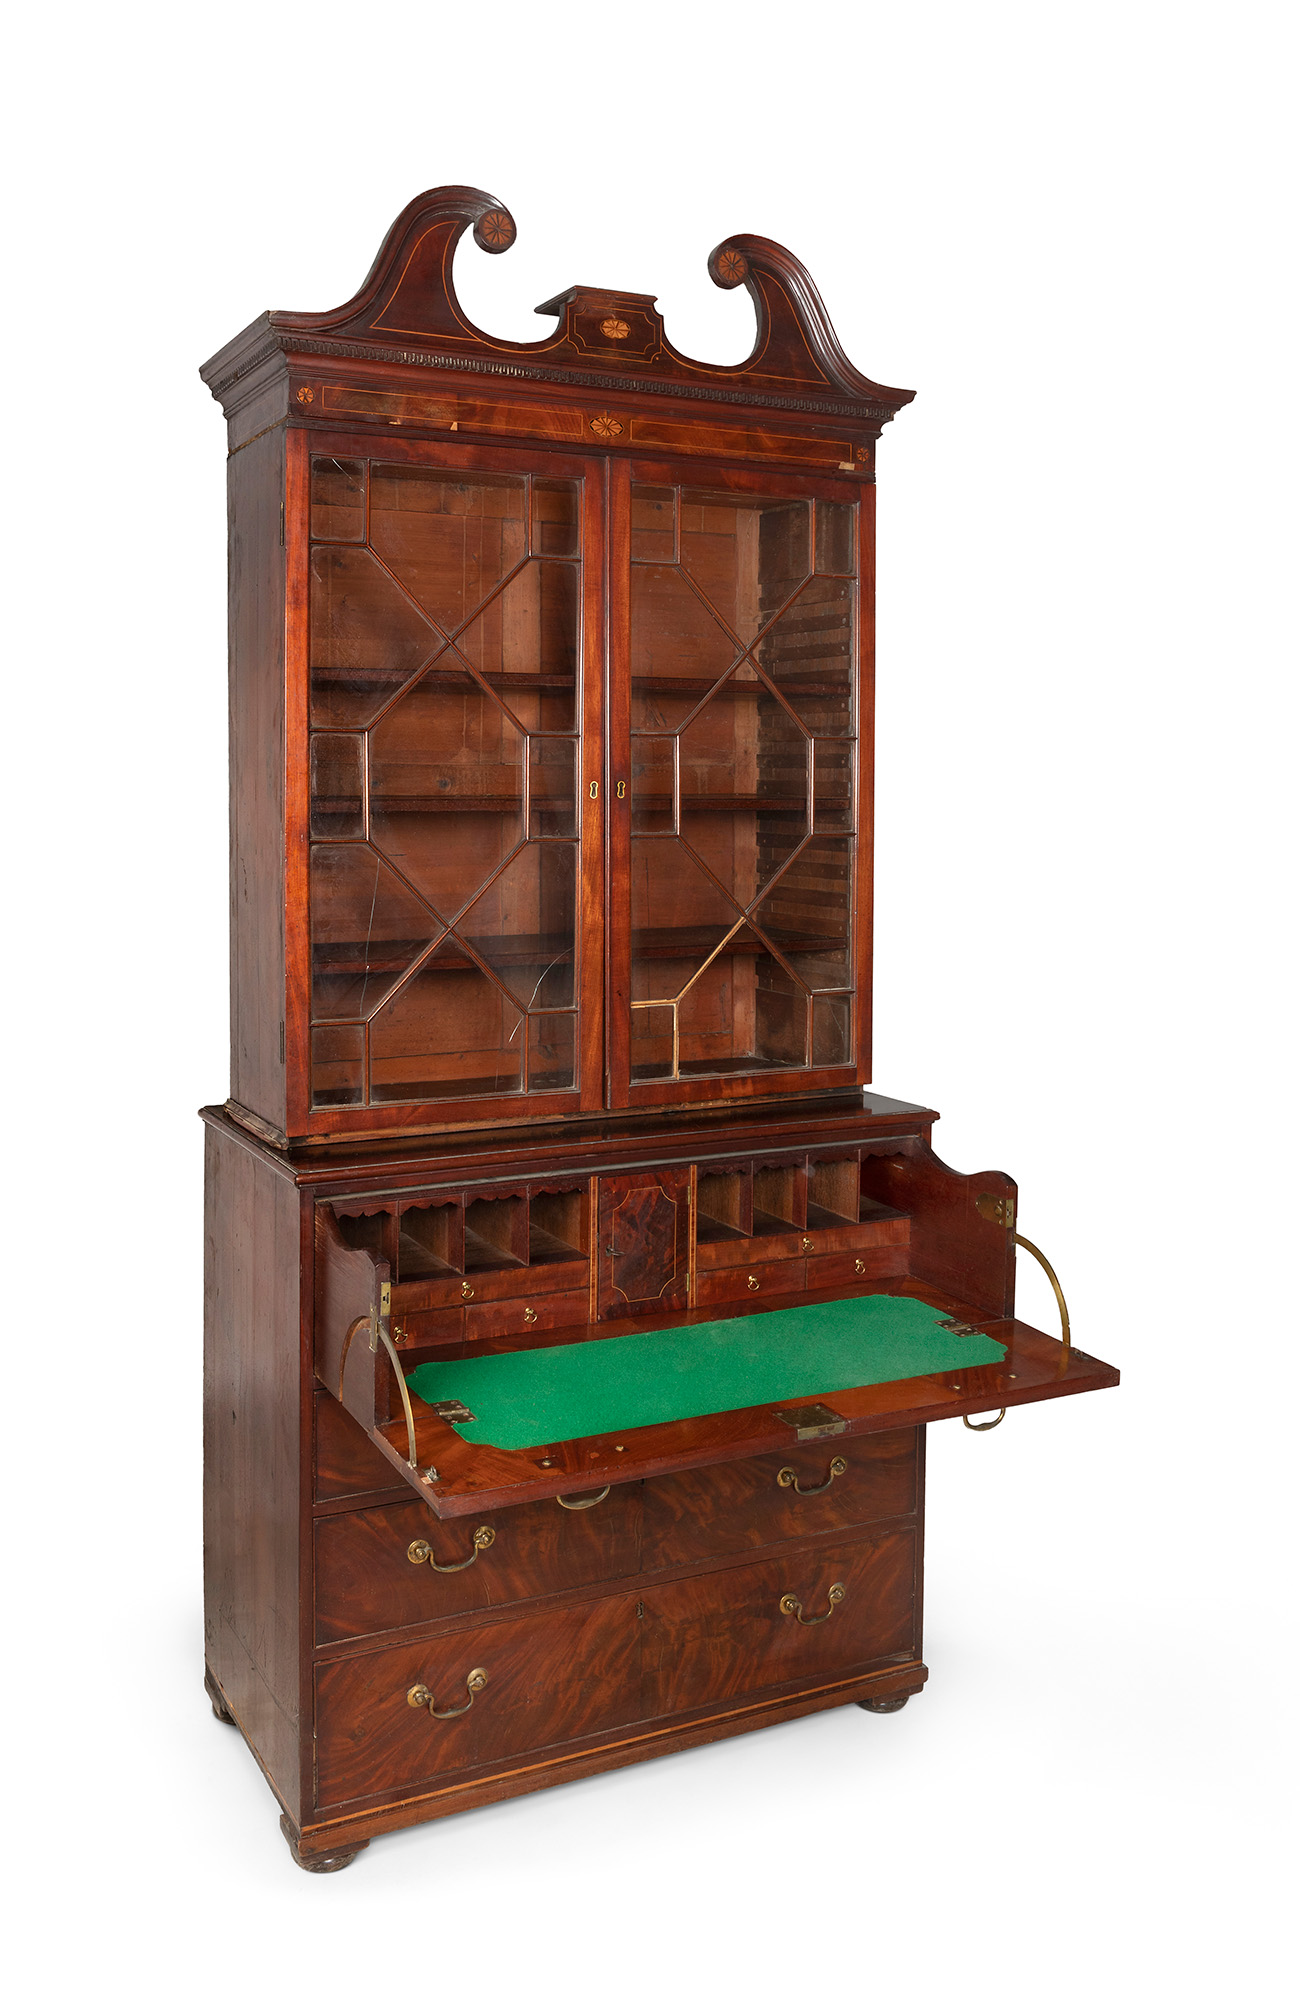 Georgian period desk-bookcase. England, late 18th-early 19th century.Mahogany wood and lemongrass